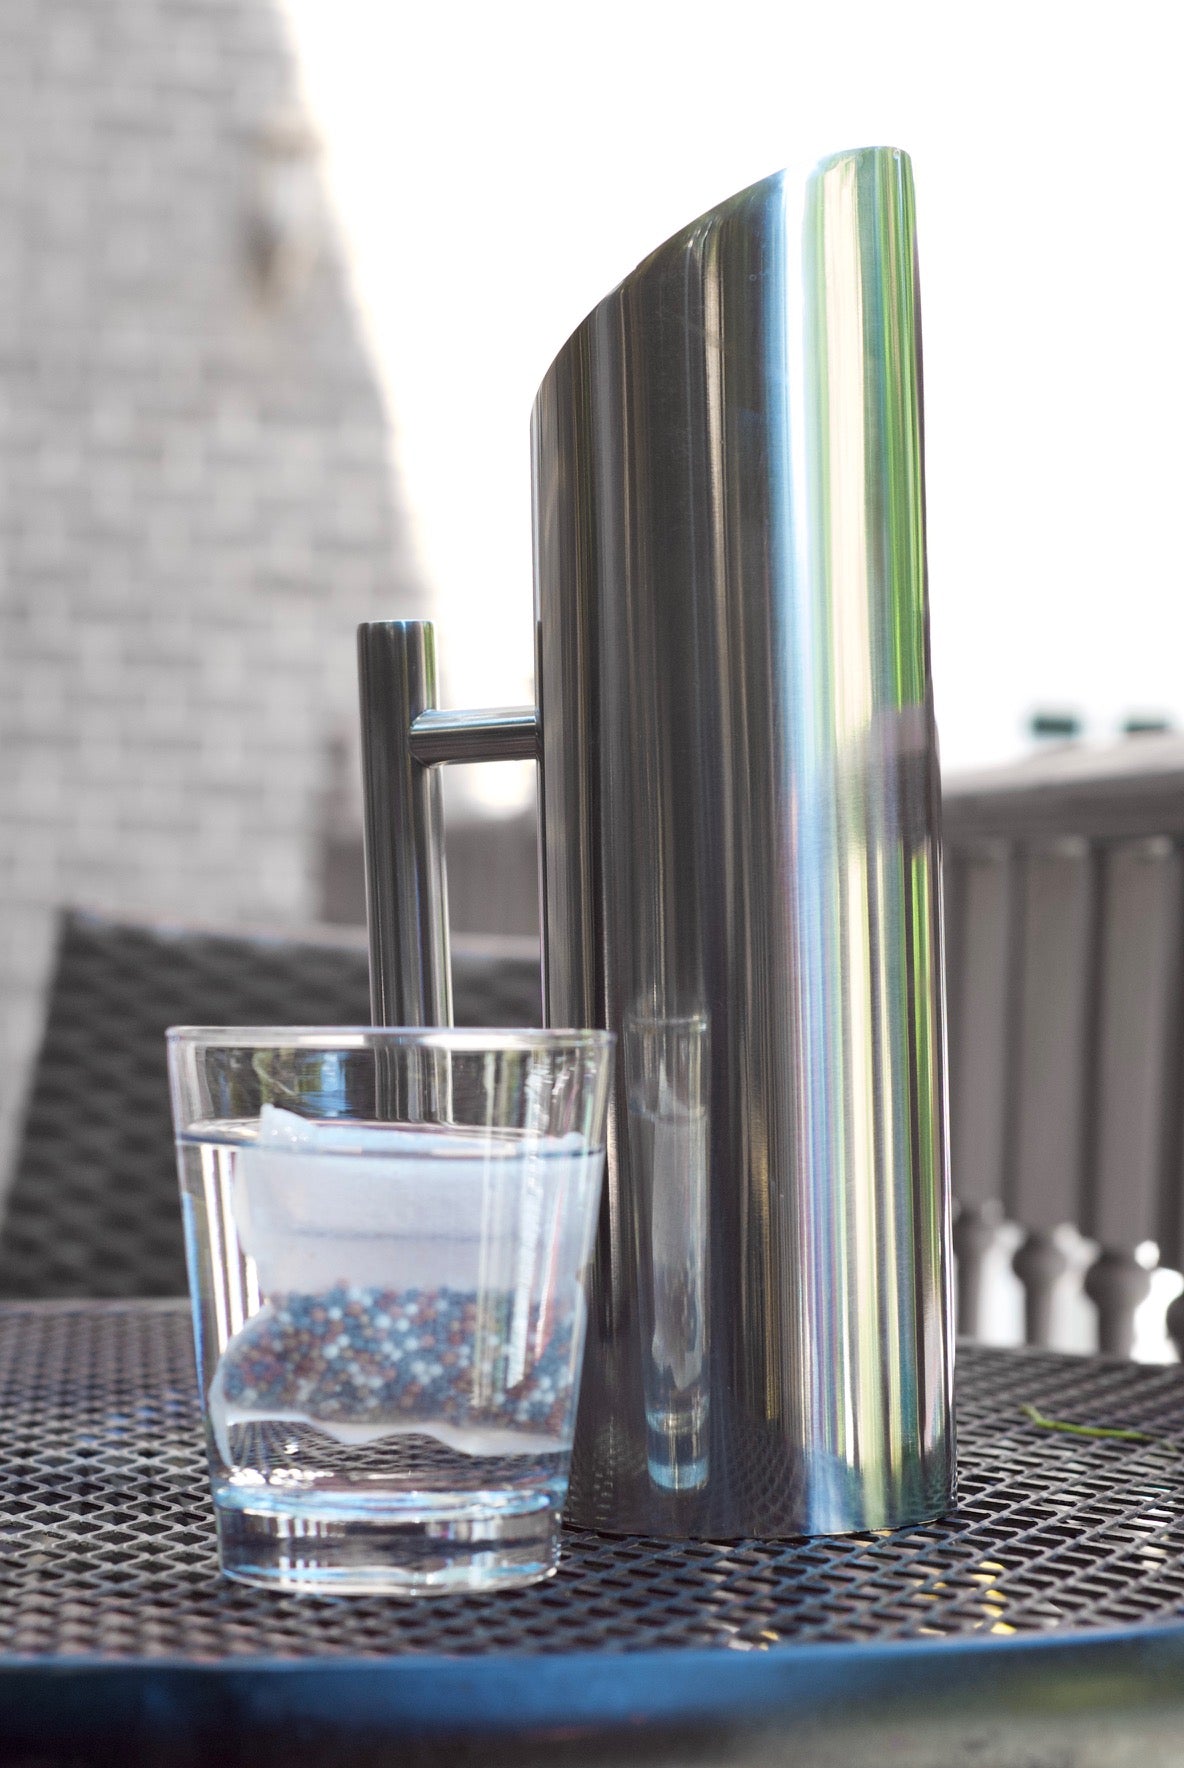 Alkaline Anytime Stainless Steel Water Pitcher with Alkaline Water Filter - Alkaline Anytime